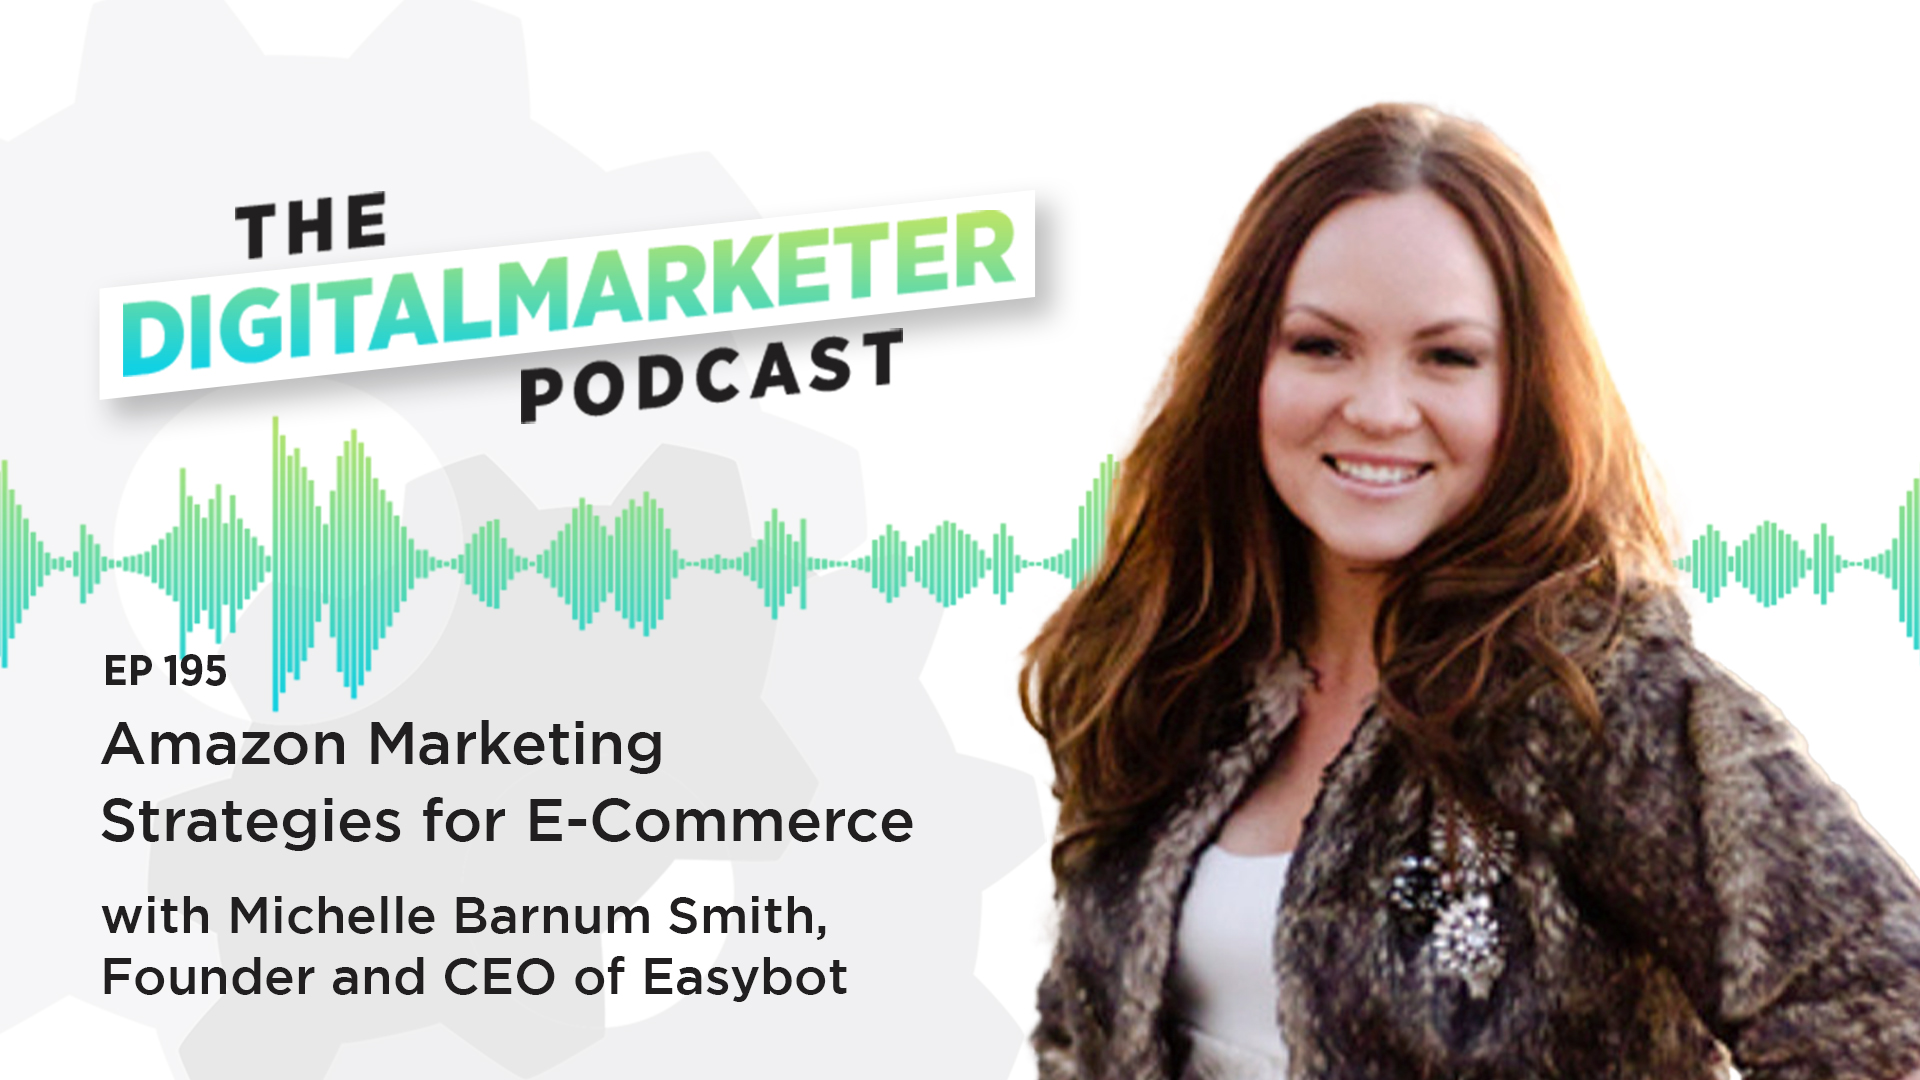 Amazon Marketing Strategies for E-Commerce Businesses with Michelle Barnum Smith, Founder and CEO of Easybot